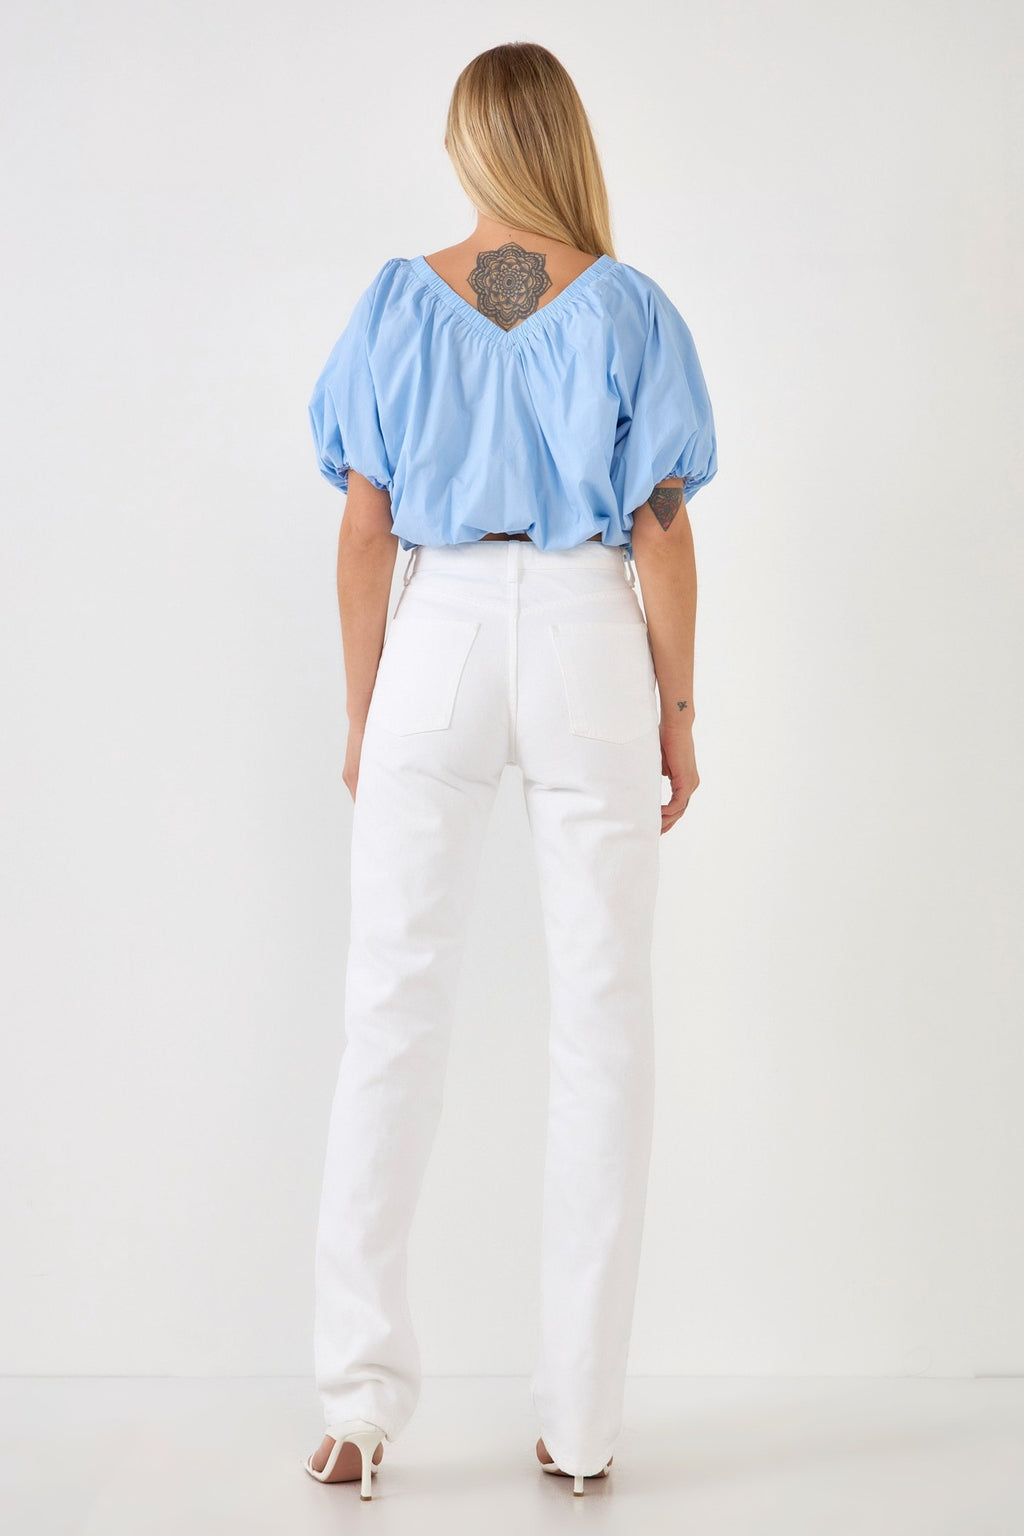 Cropped Puff Blue Top